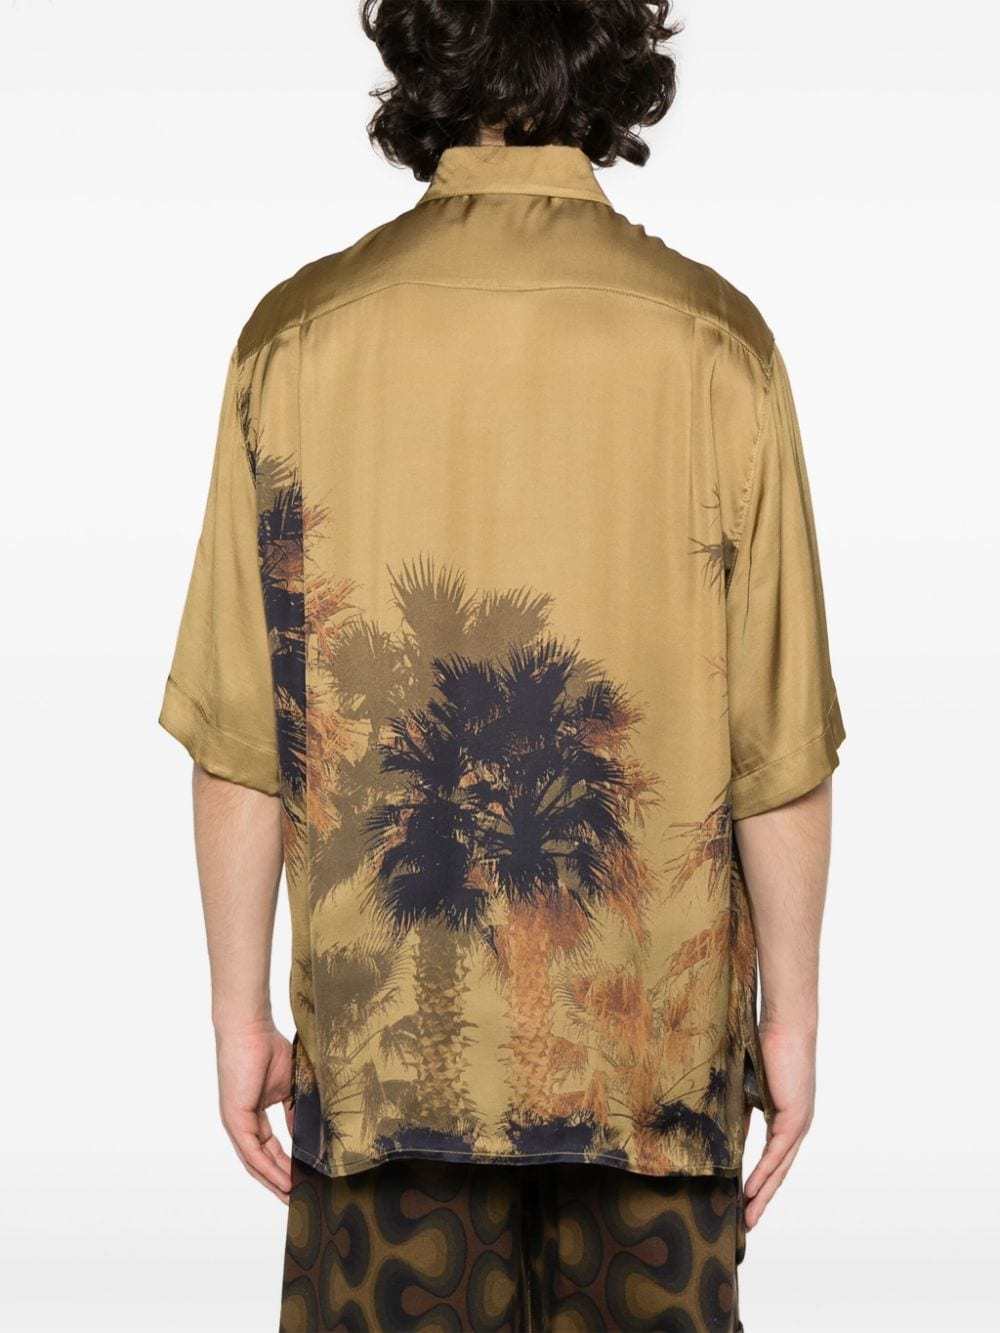 Green shirt with palm print